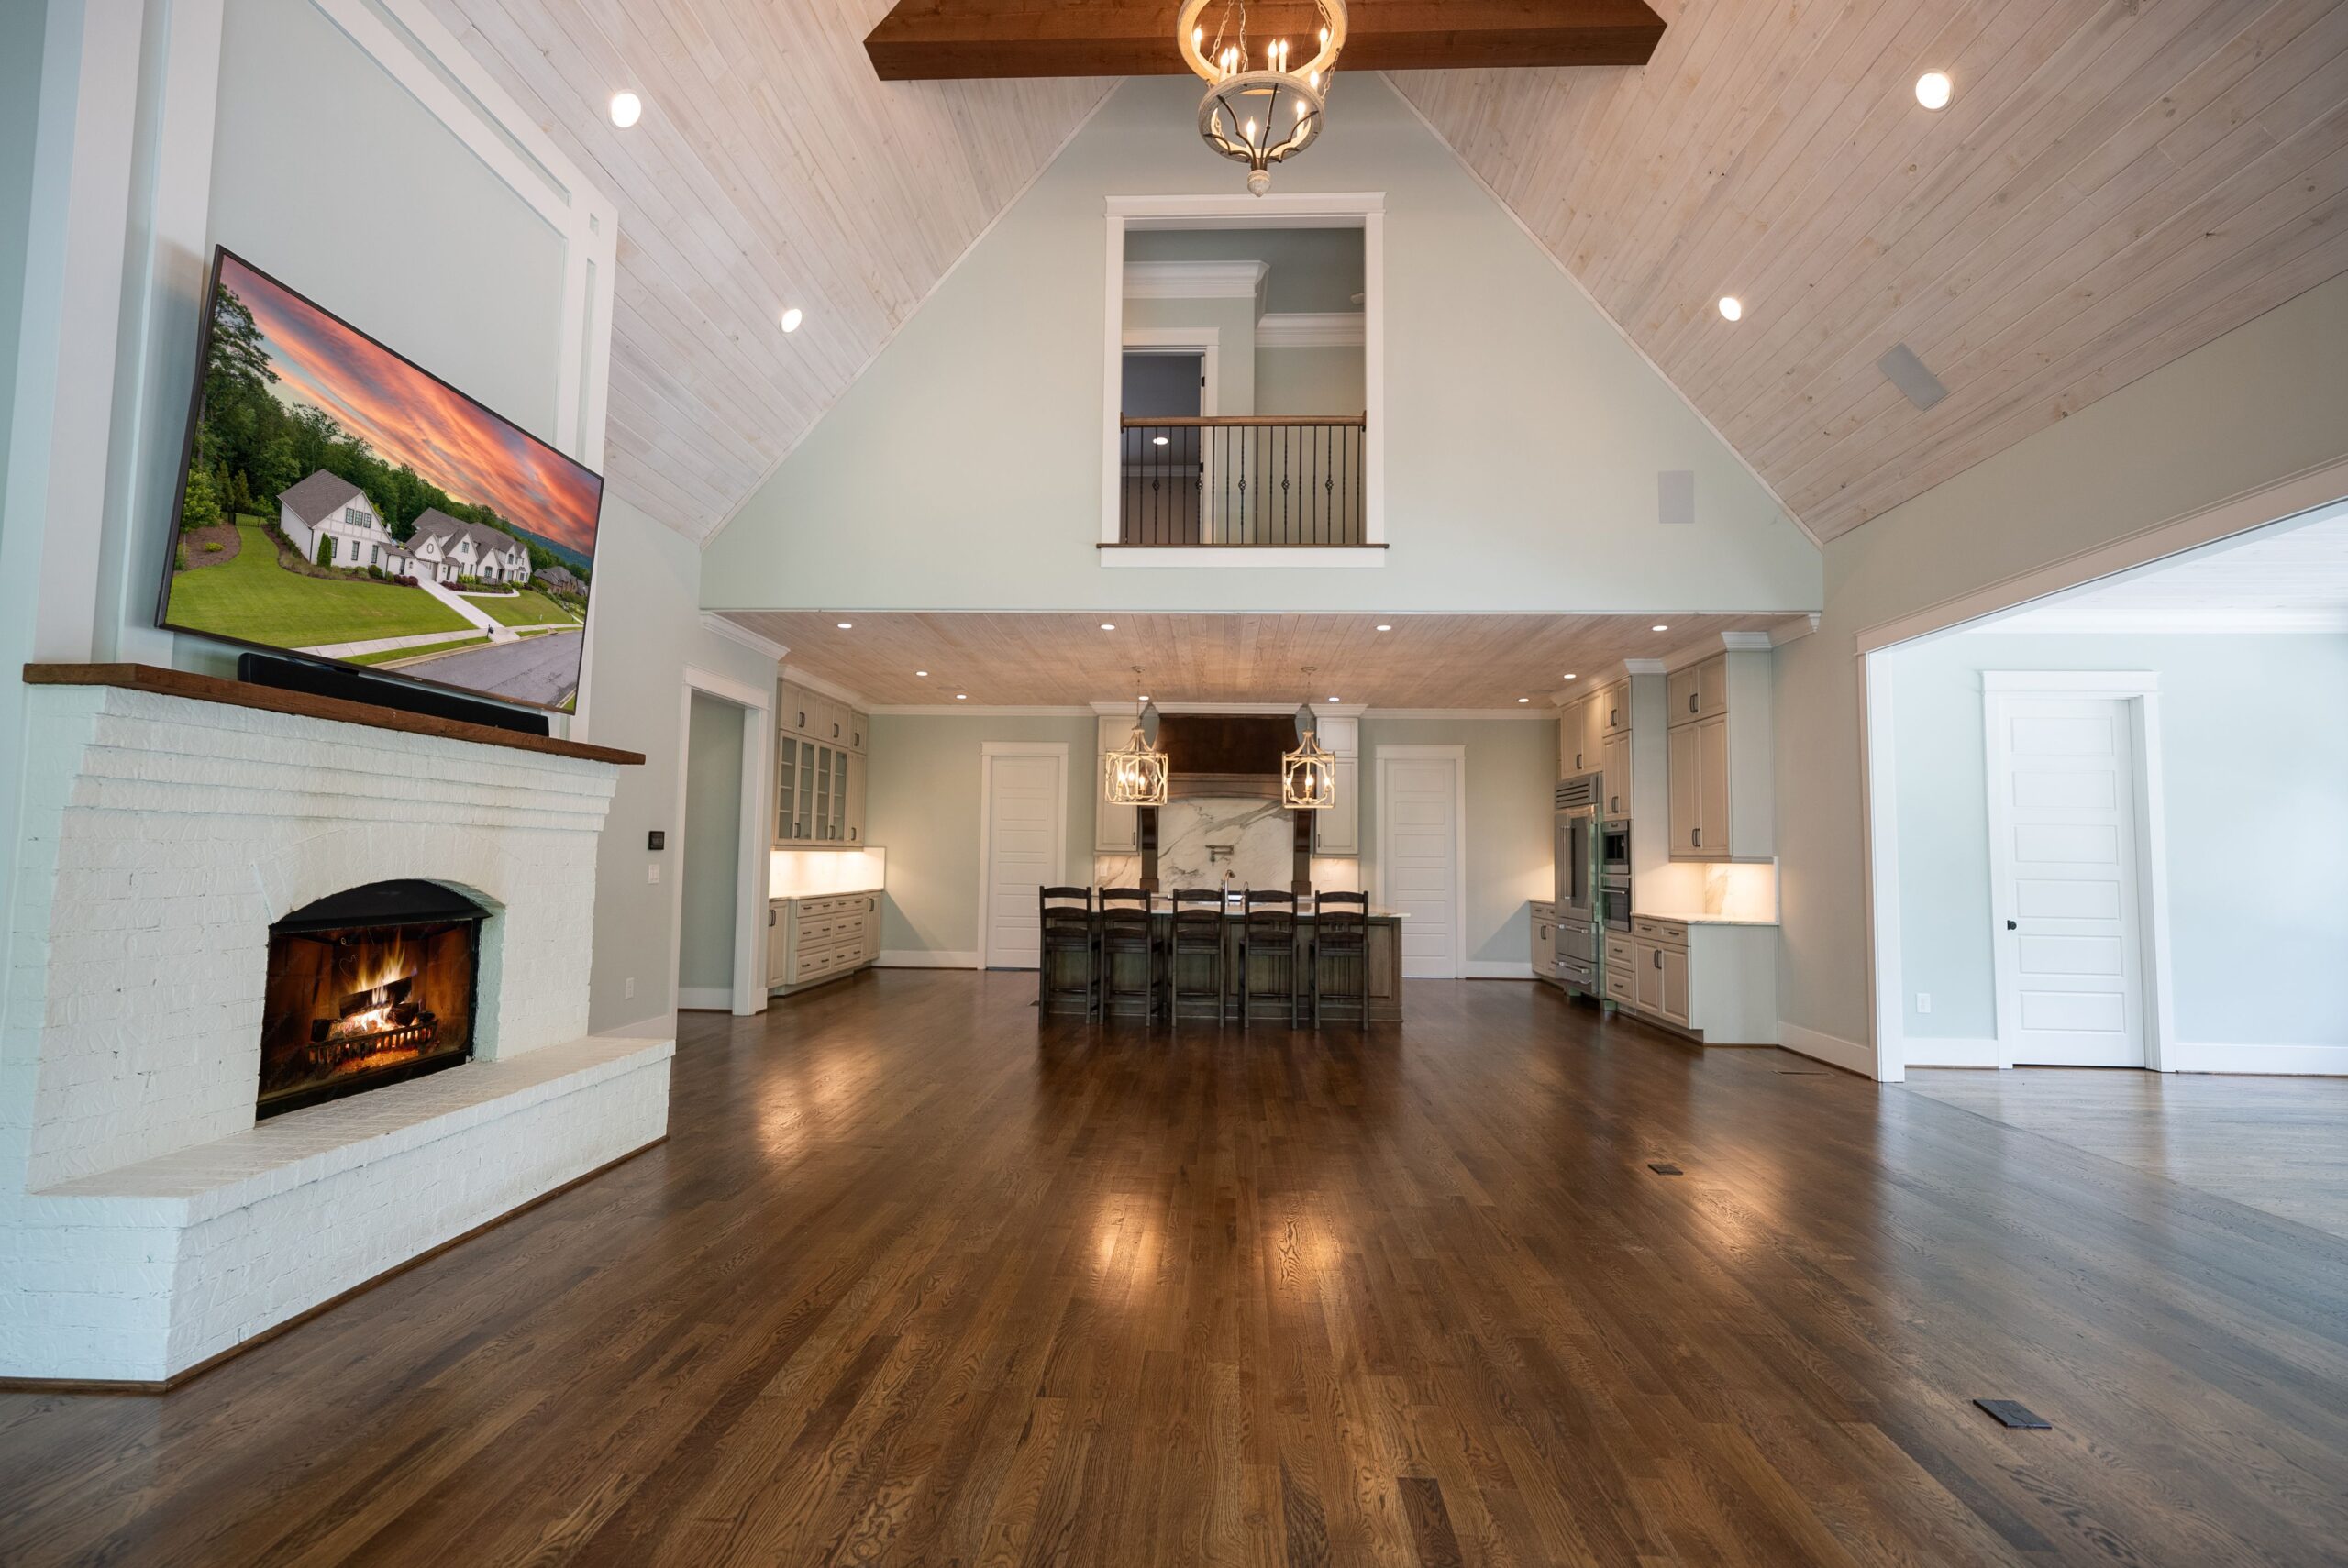 A large open room with wood floors and a fireplace.